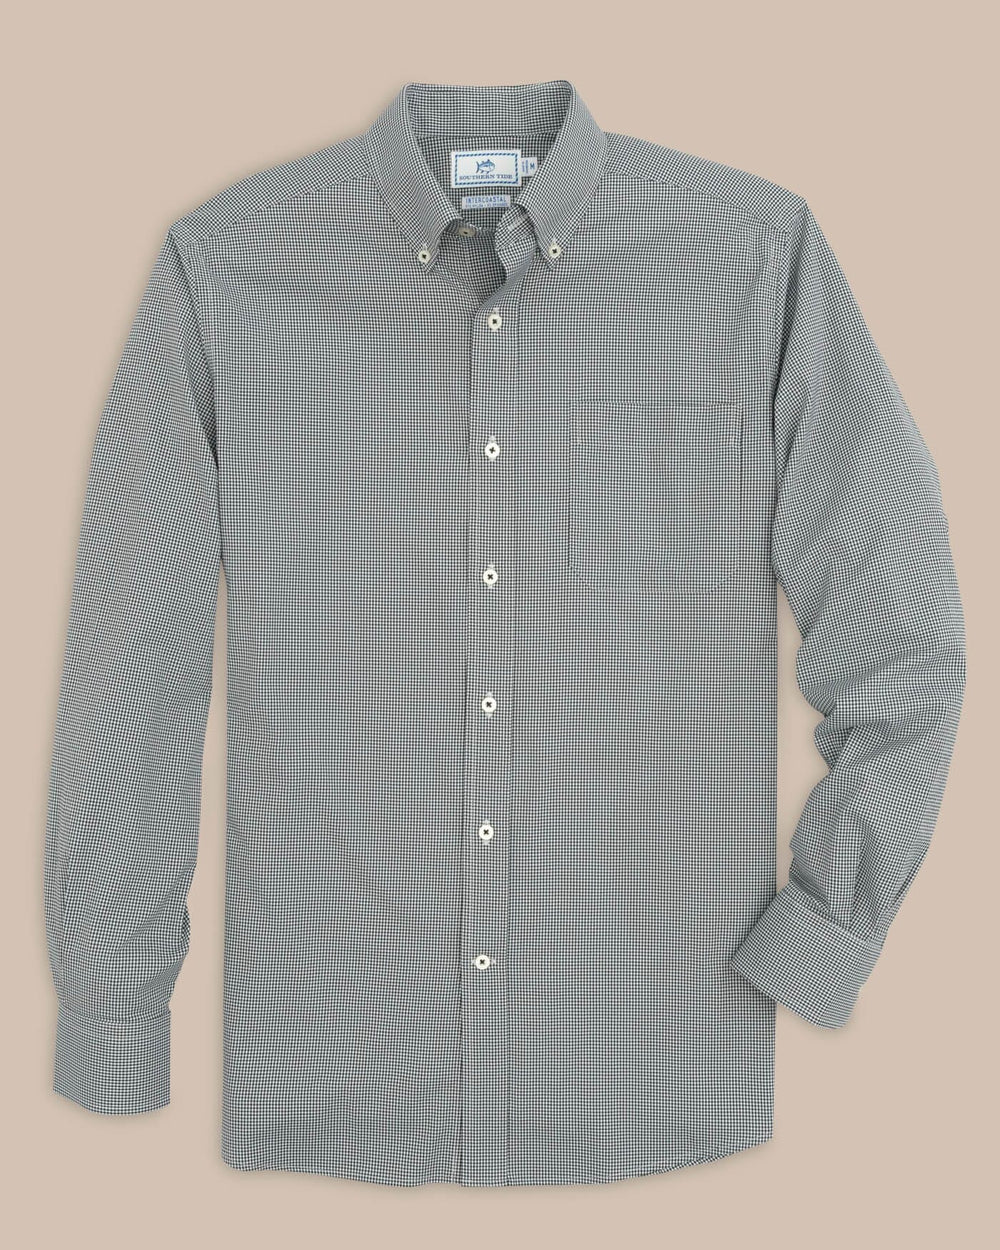 The front view of the Southern Tide Team Colors Gingham Intercoastal Sport Shirt by Southern Tide - Black